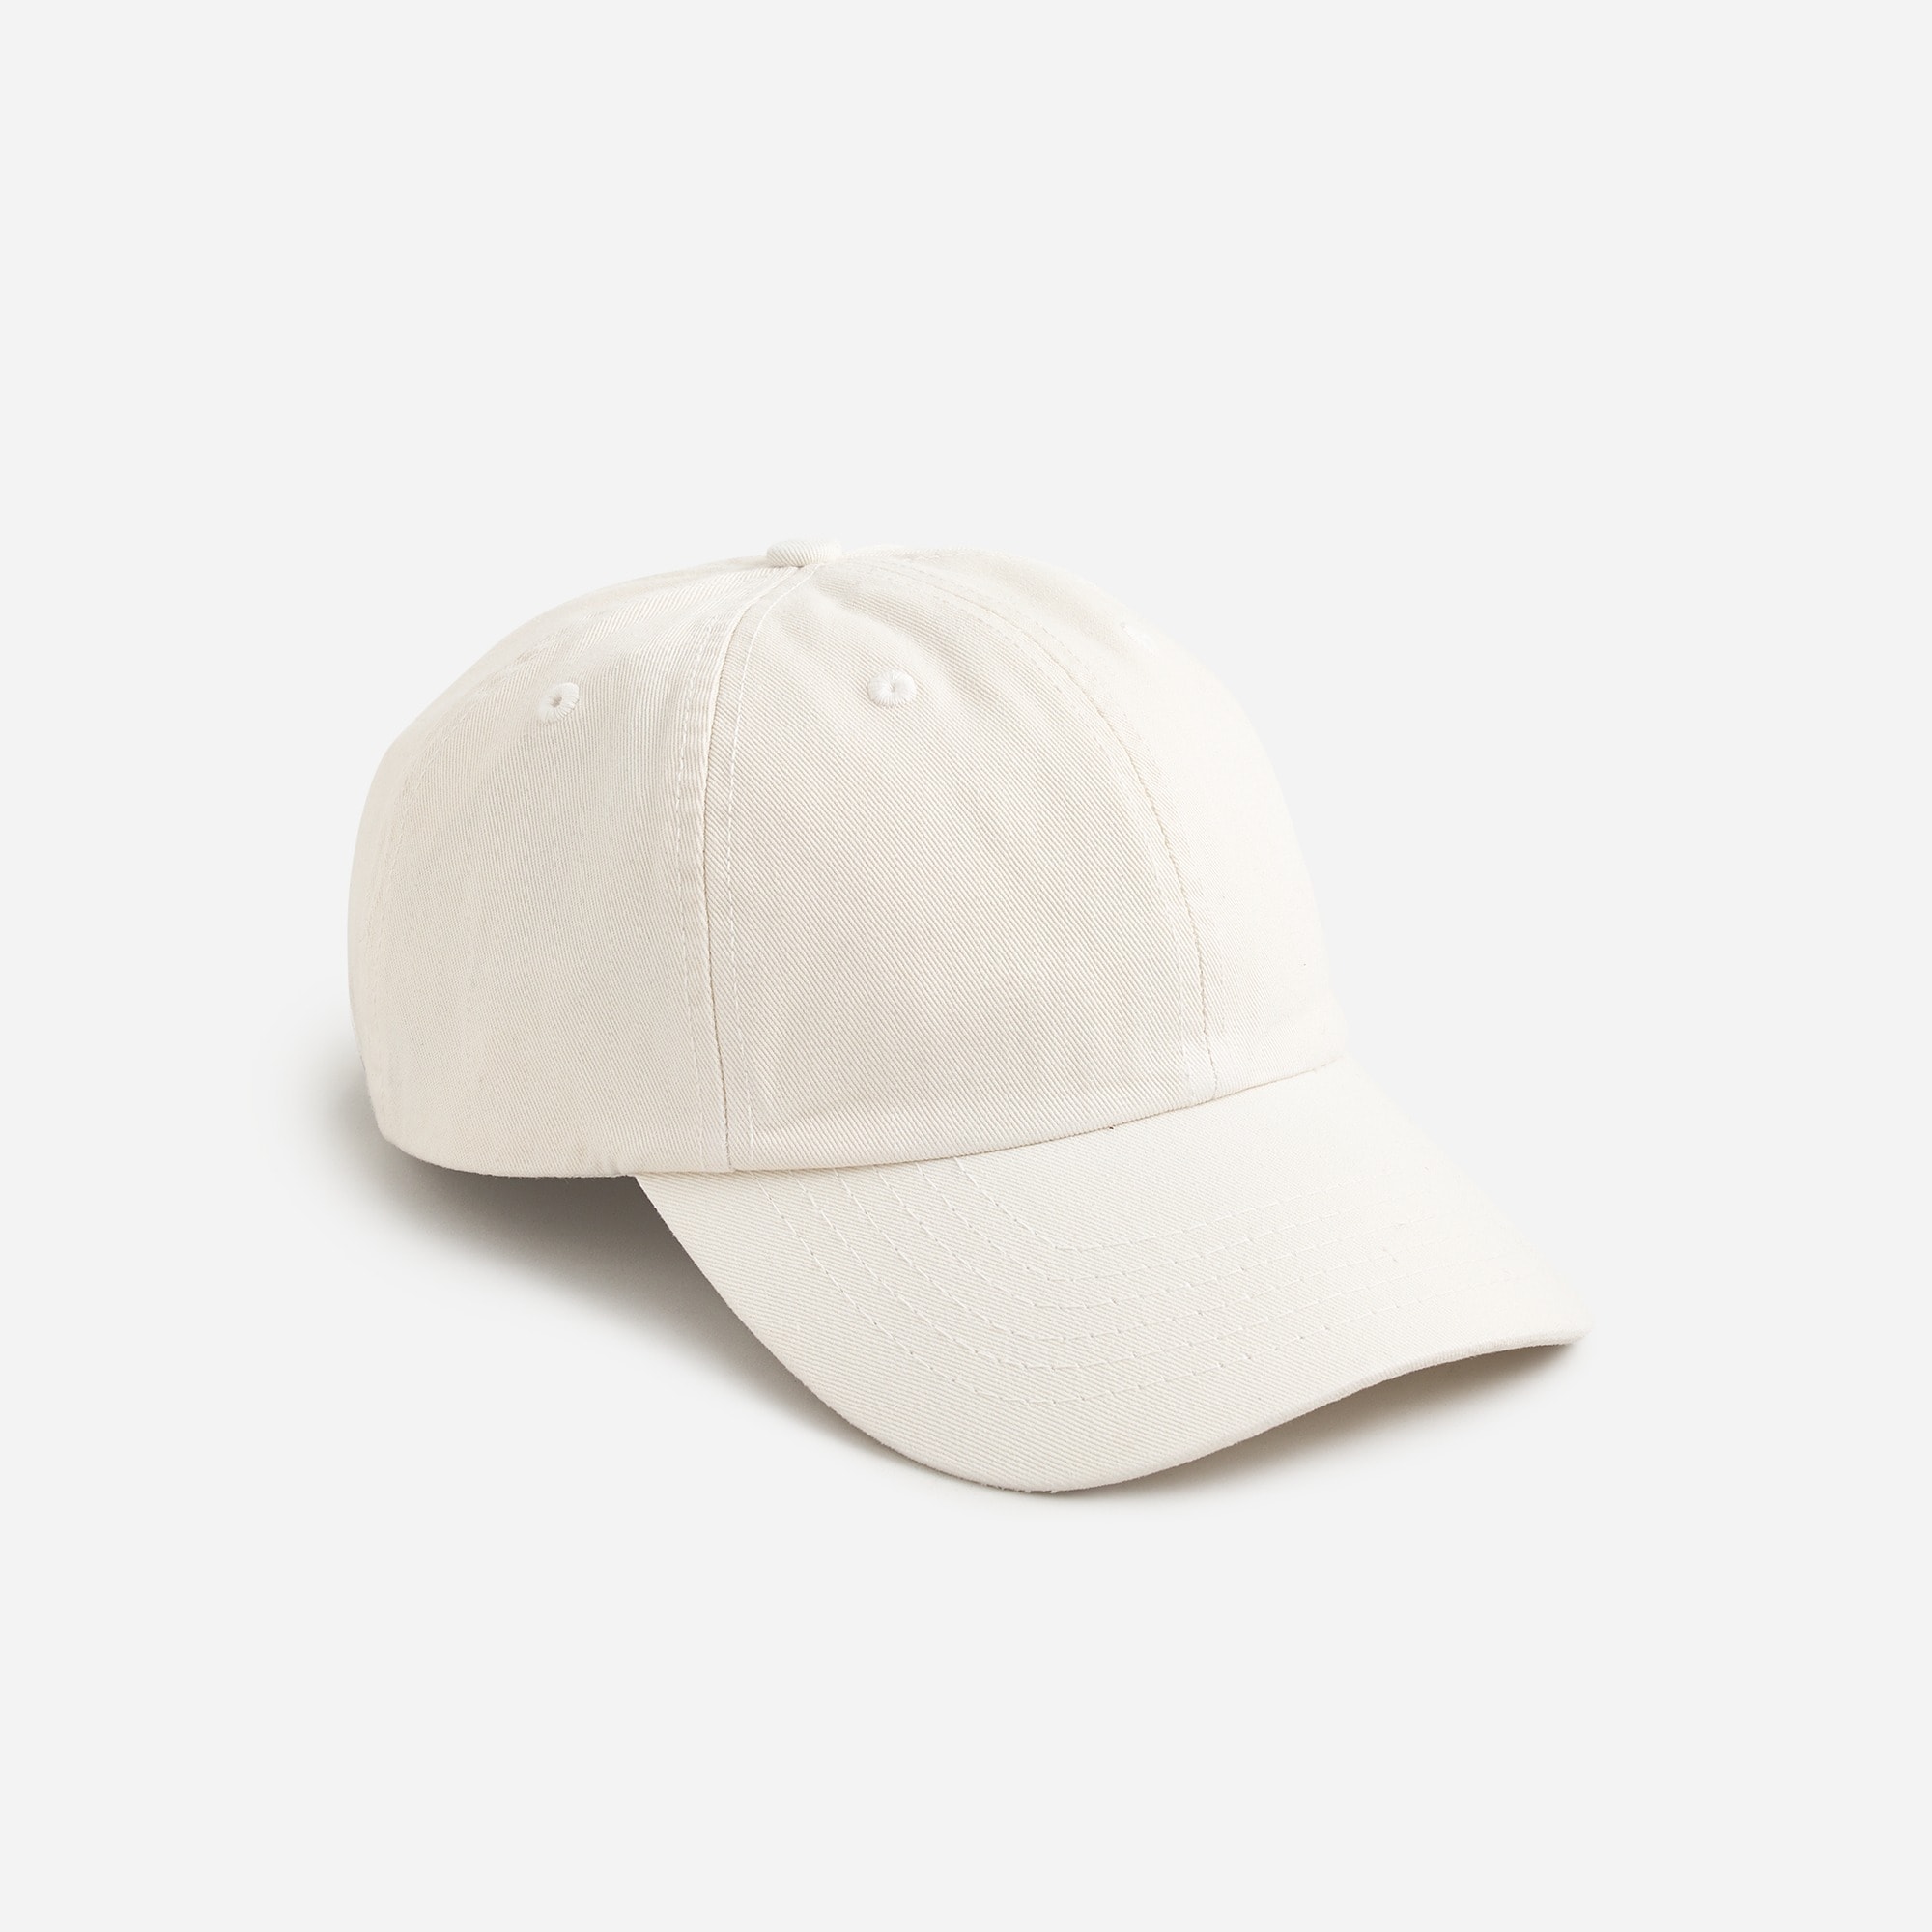 Jcrew Made-in-the-USA garment-dyed twill baseball cap